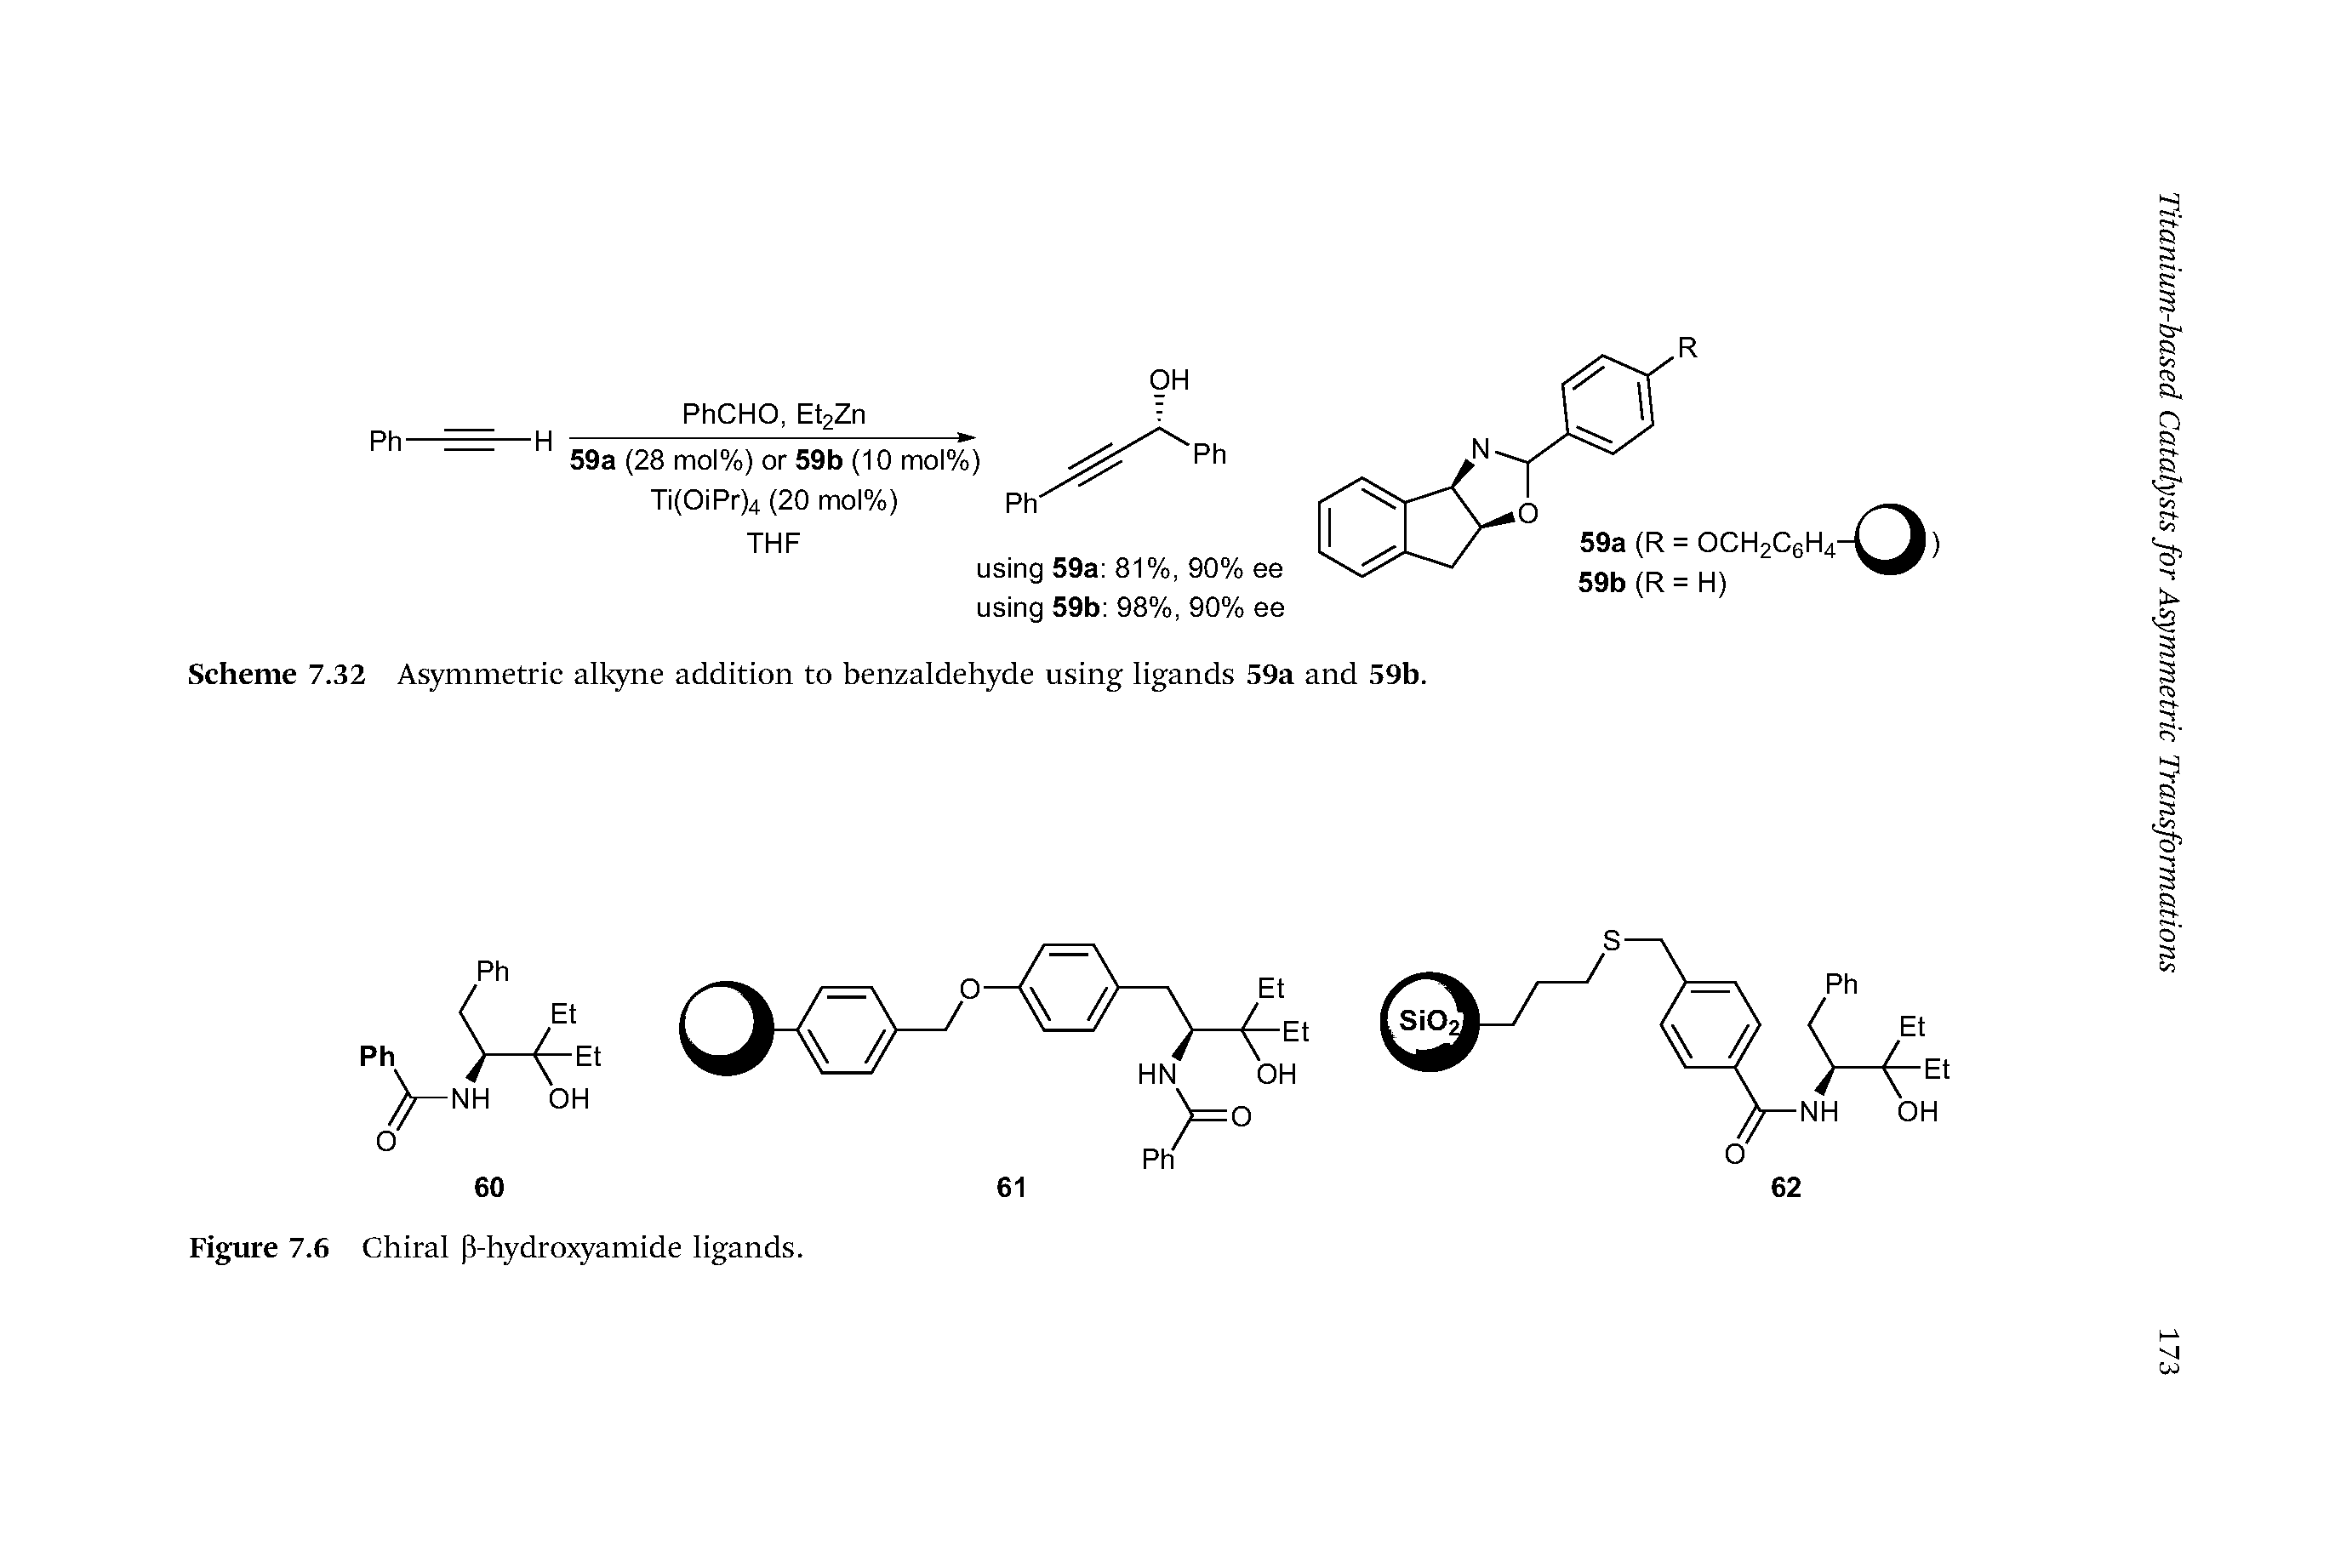 Scheme 7.32 Asymmetric alkyne addition to benzaldehyde using ligands 59a and 59b.